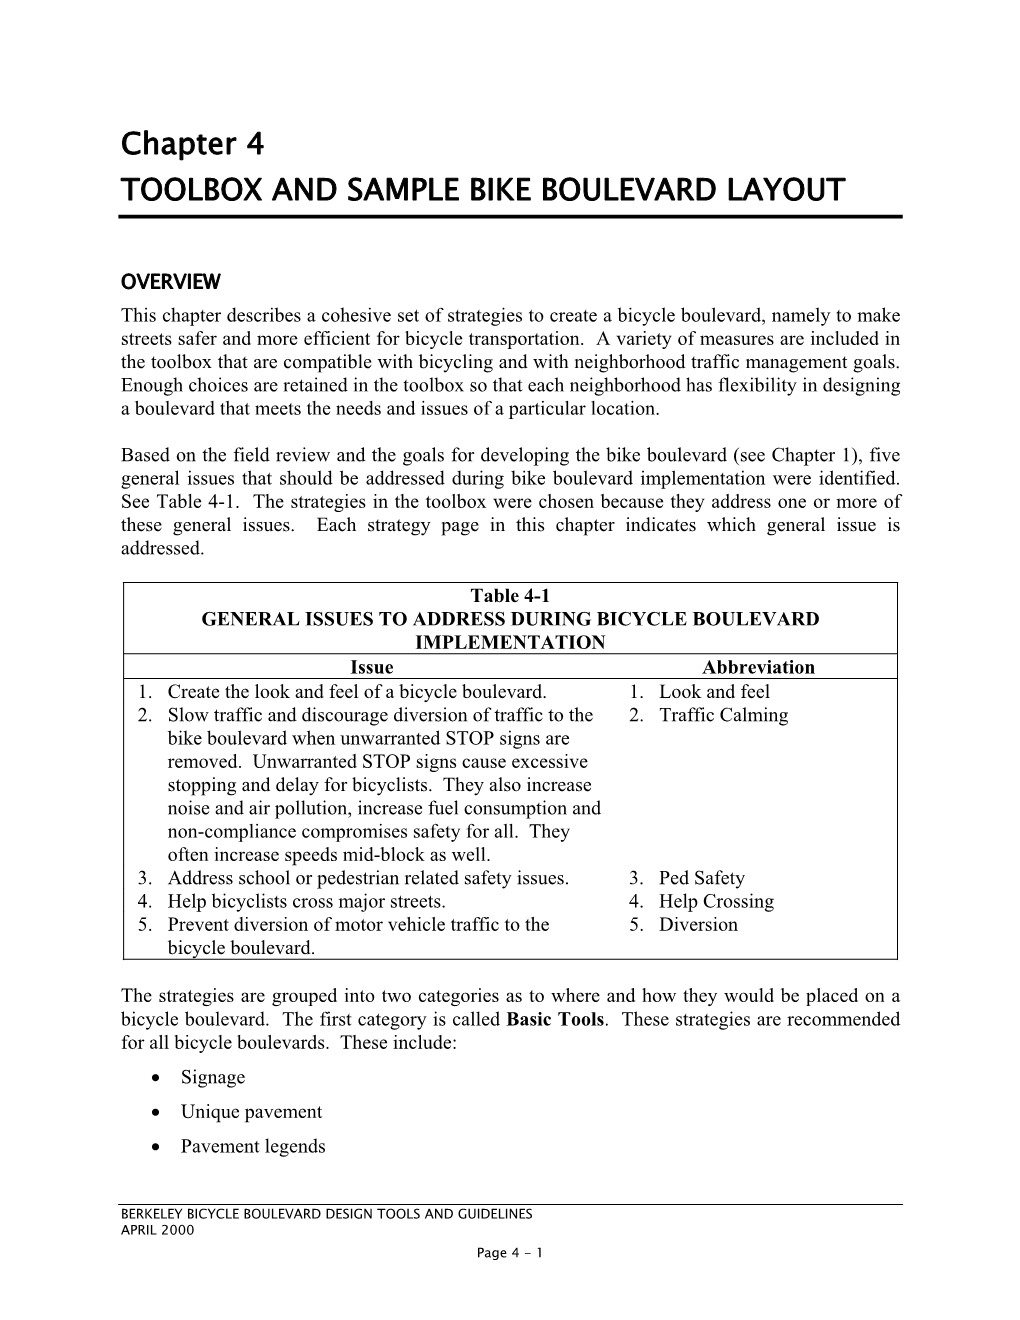 Chapter 4 TOOLBOX and SAMPLE BIKE BOULEVARD LAYOUT